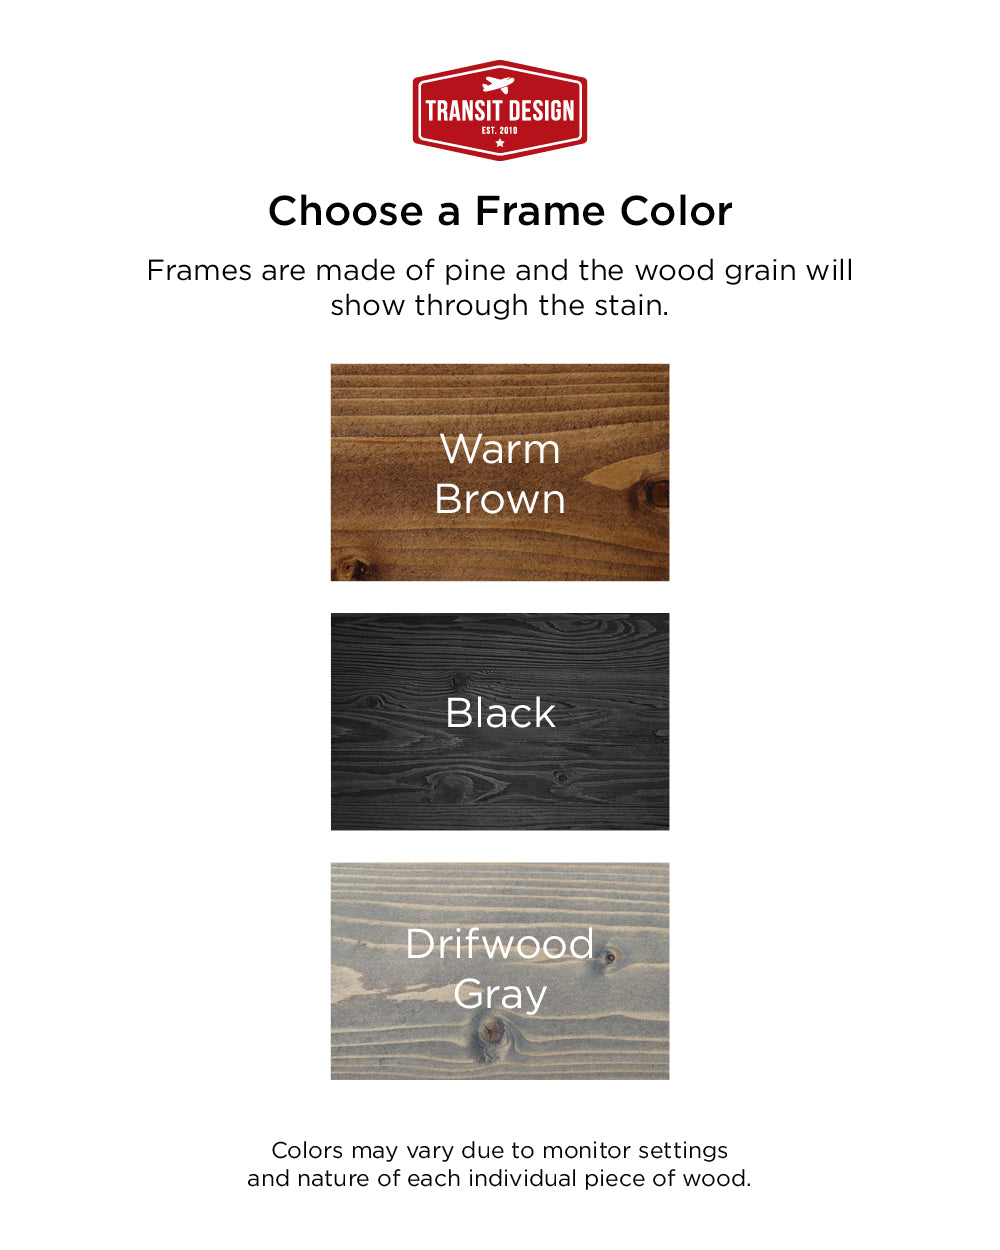 Farmhouse Signs by Transit Design, Frame Colors